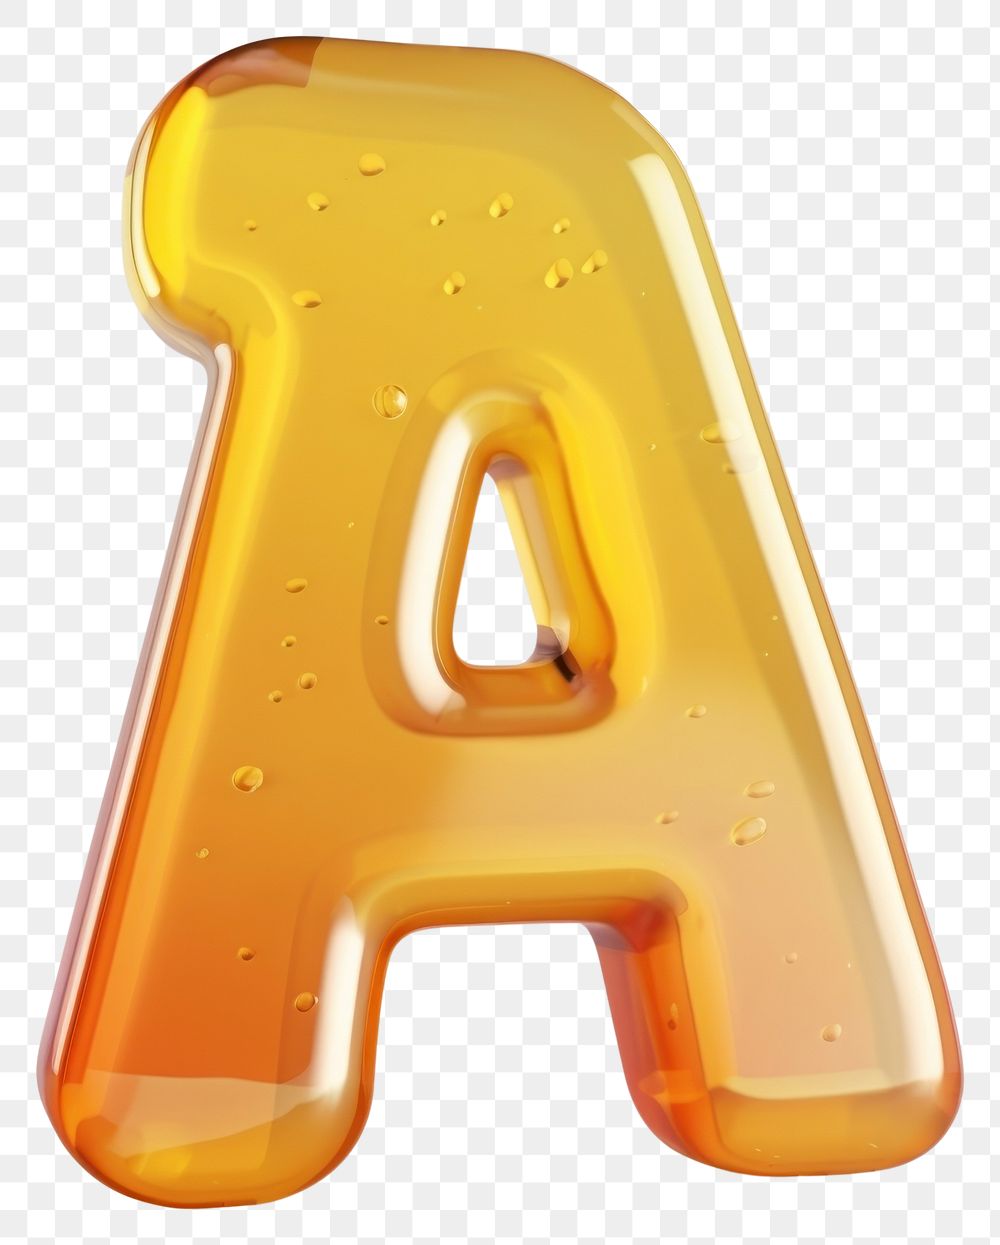 Letter A yellow number symbol.